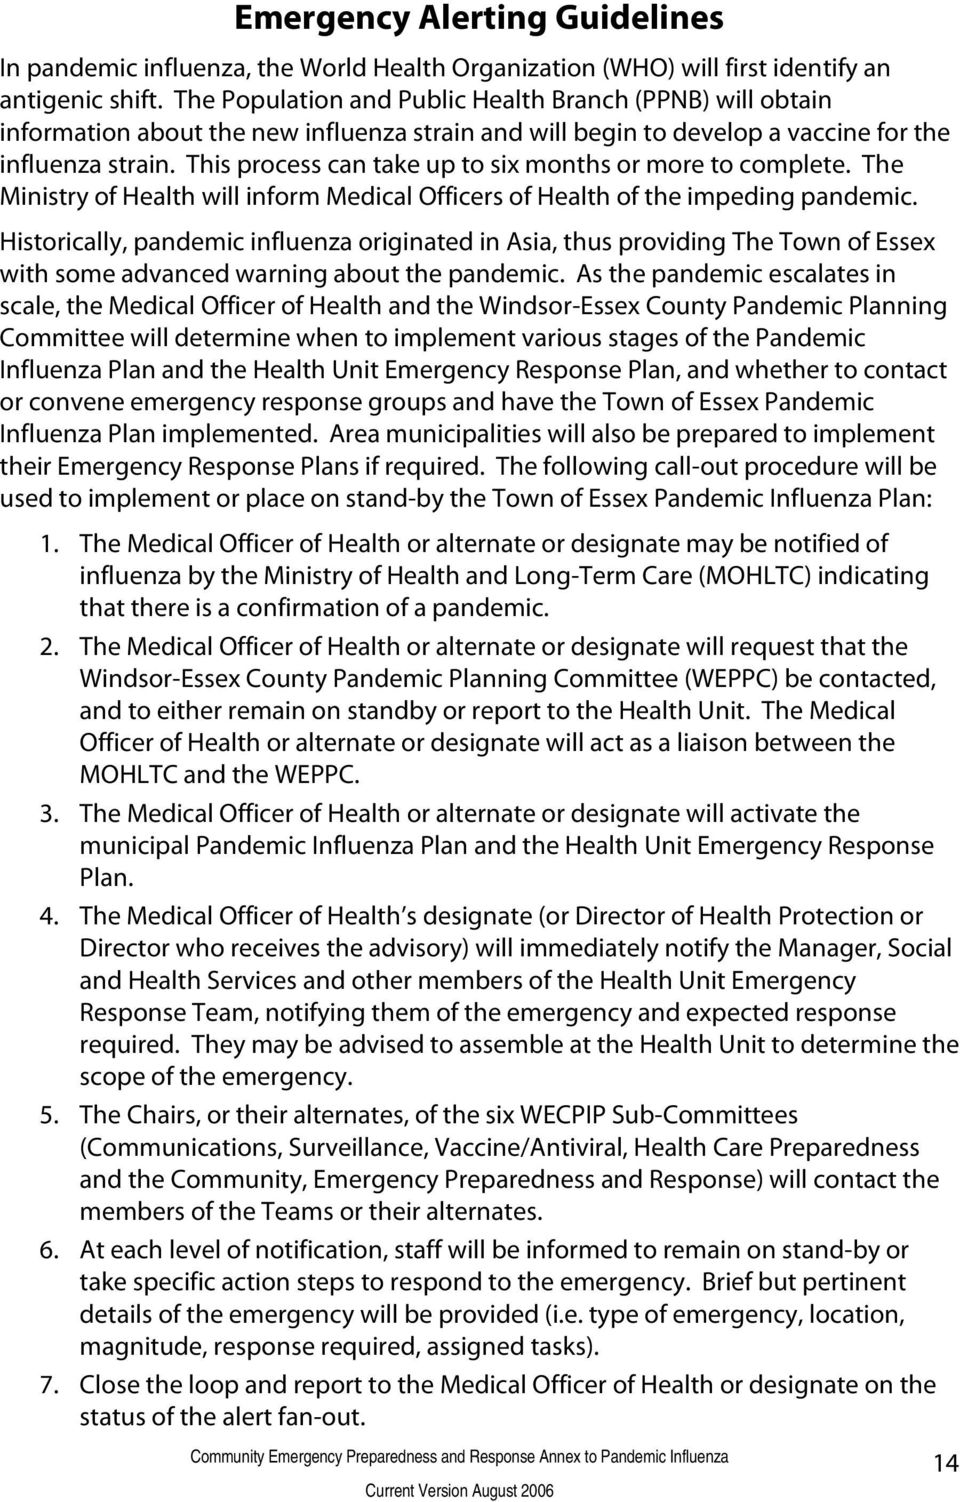 This process can take up to six months or more to complete. The Ministry of Health will inform Medical Officers of Health of the impeding pandemic.